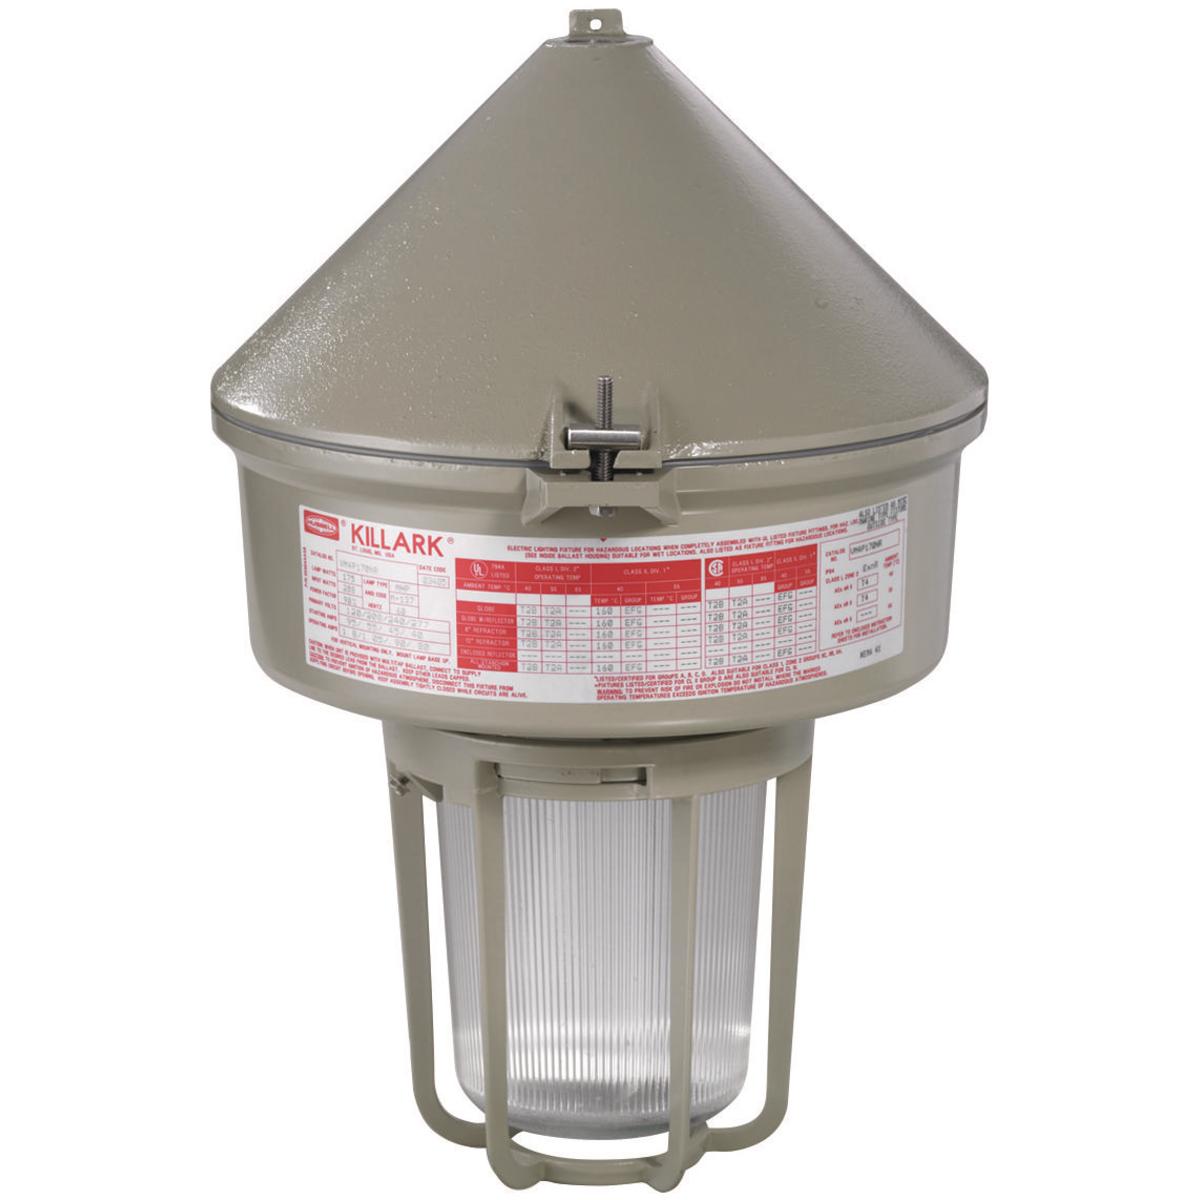 Hubbell VM3P155C2GLG VM3 Series - 150W Metal Halide 480V - 3/4" Cone Top - Globe and Guard  ; Ballast tank and splice box – corrosion resistant copper-free aluminum alloy with baked powder epoxy/polyester finish, electrostatically applied for complete, uniform corrosion prote